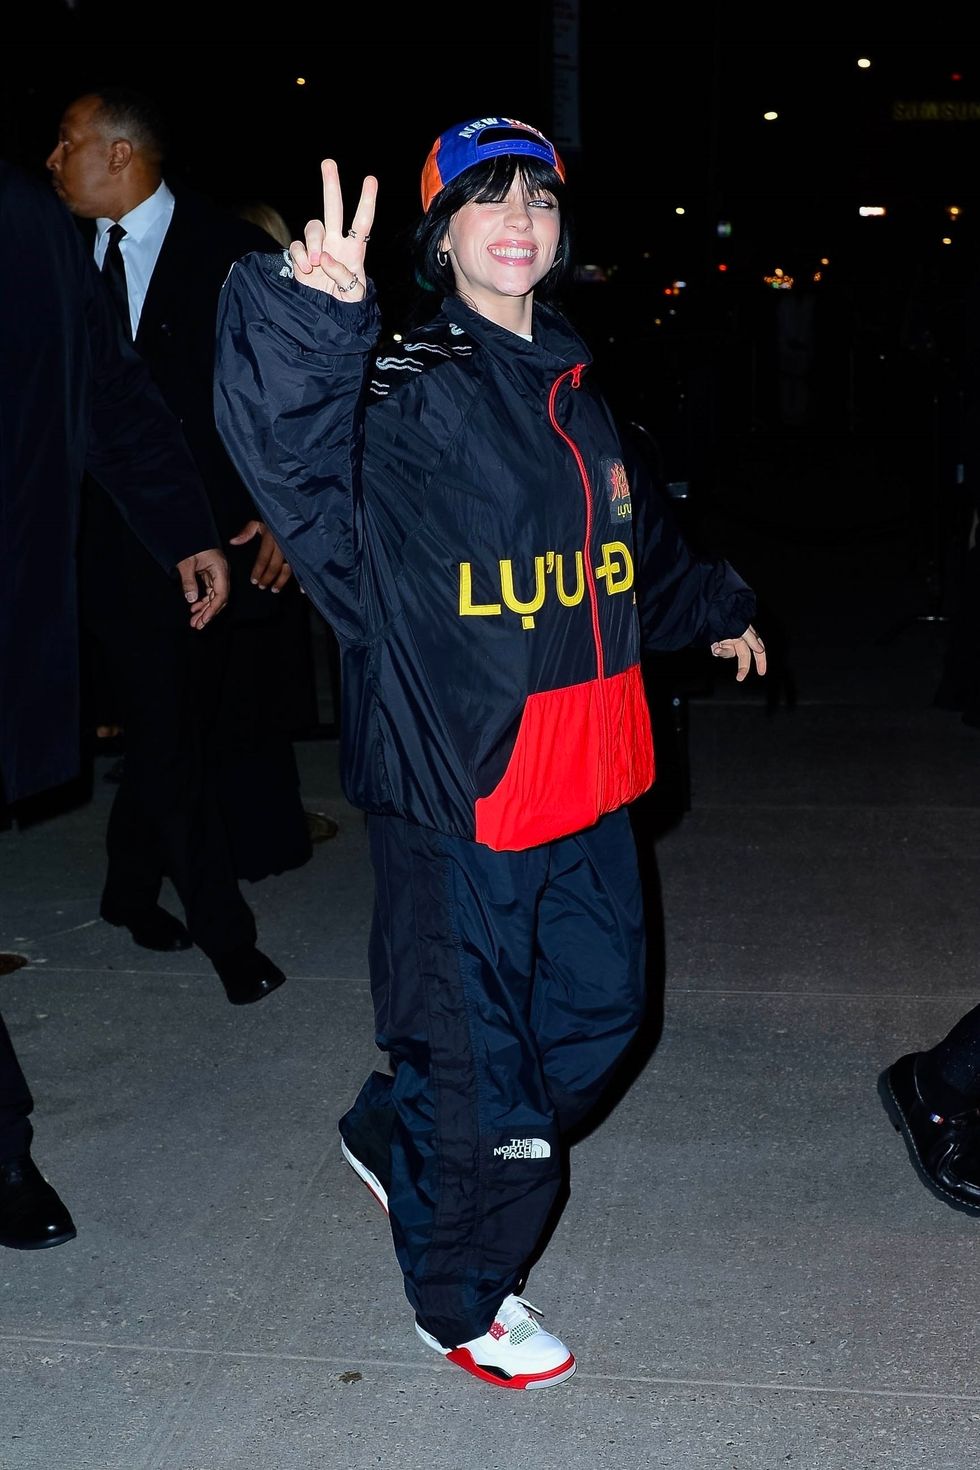 billie eilish arriving at the standard hotel's met gala after party